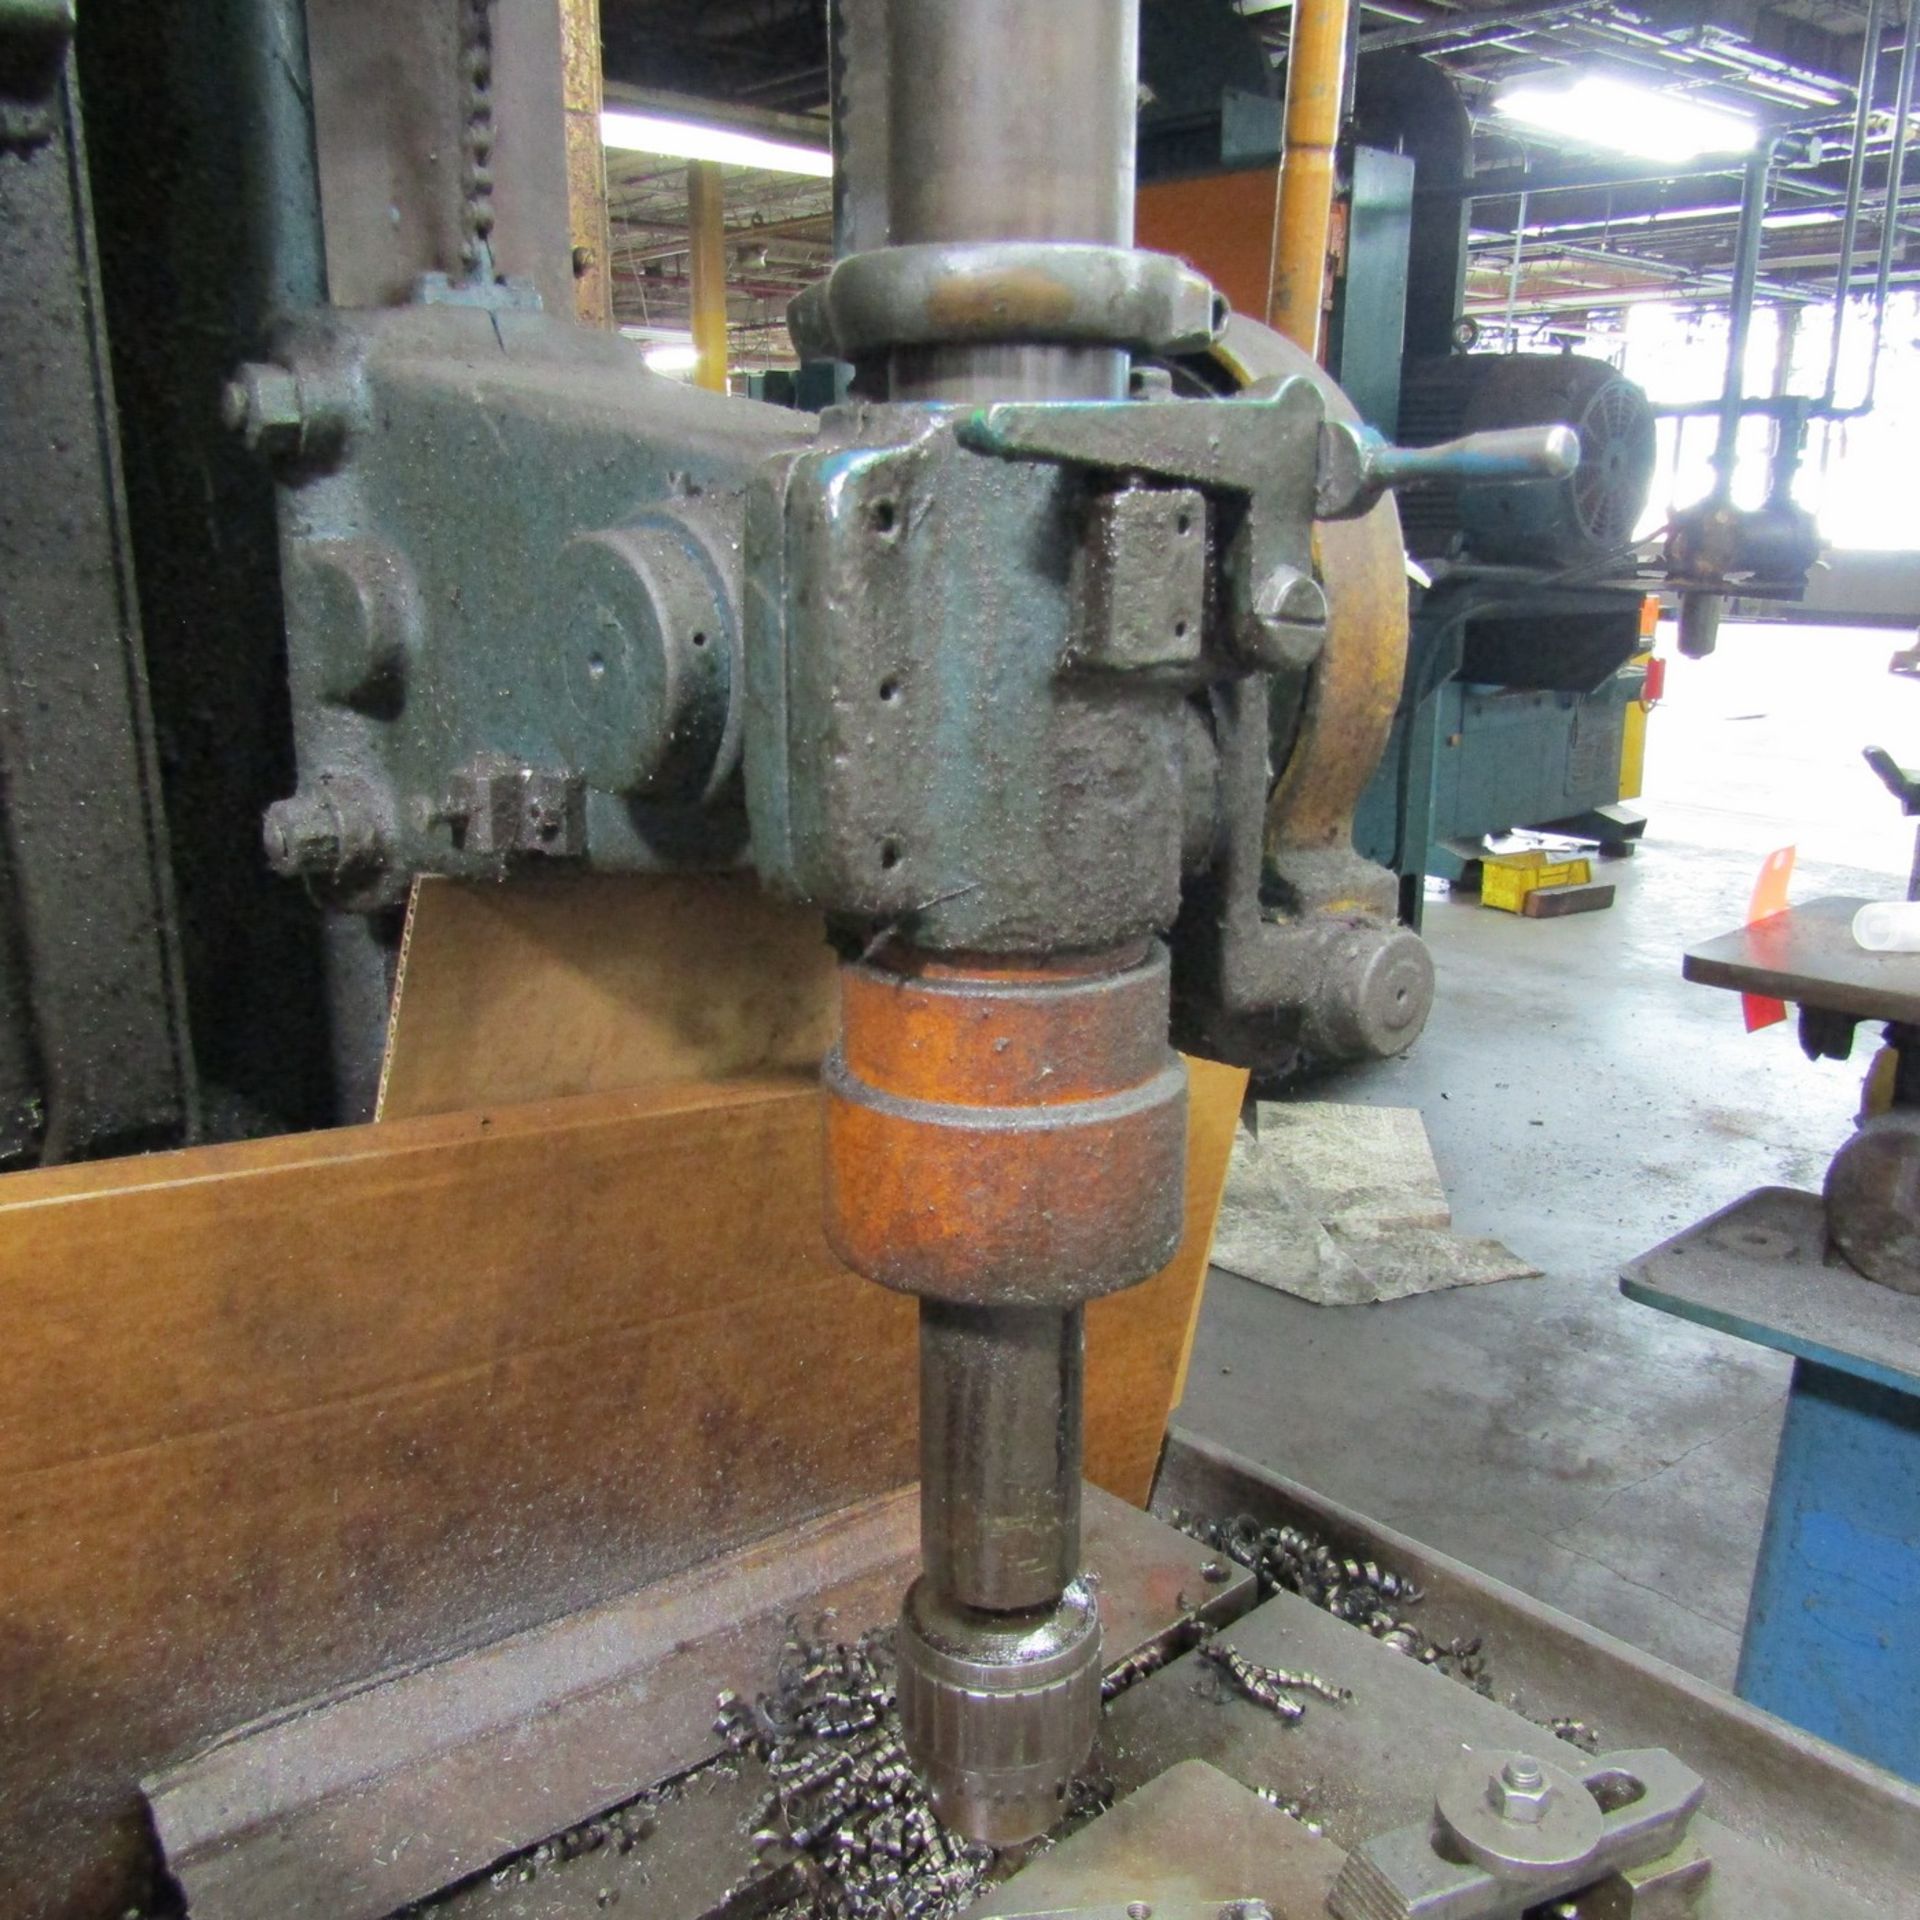 Avey 24 in. Single Spindle Vertical Boring Machine (Ref. #: 1847) - Image 3 of 4